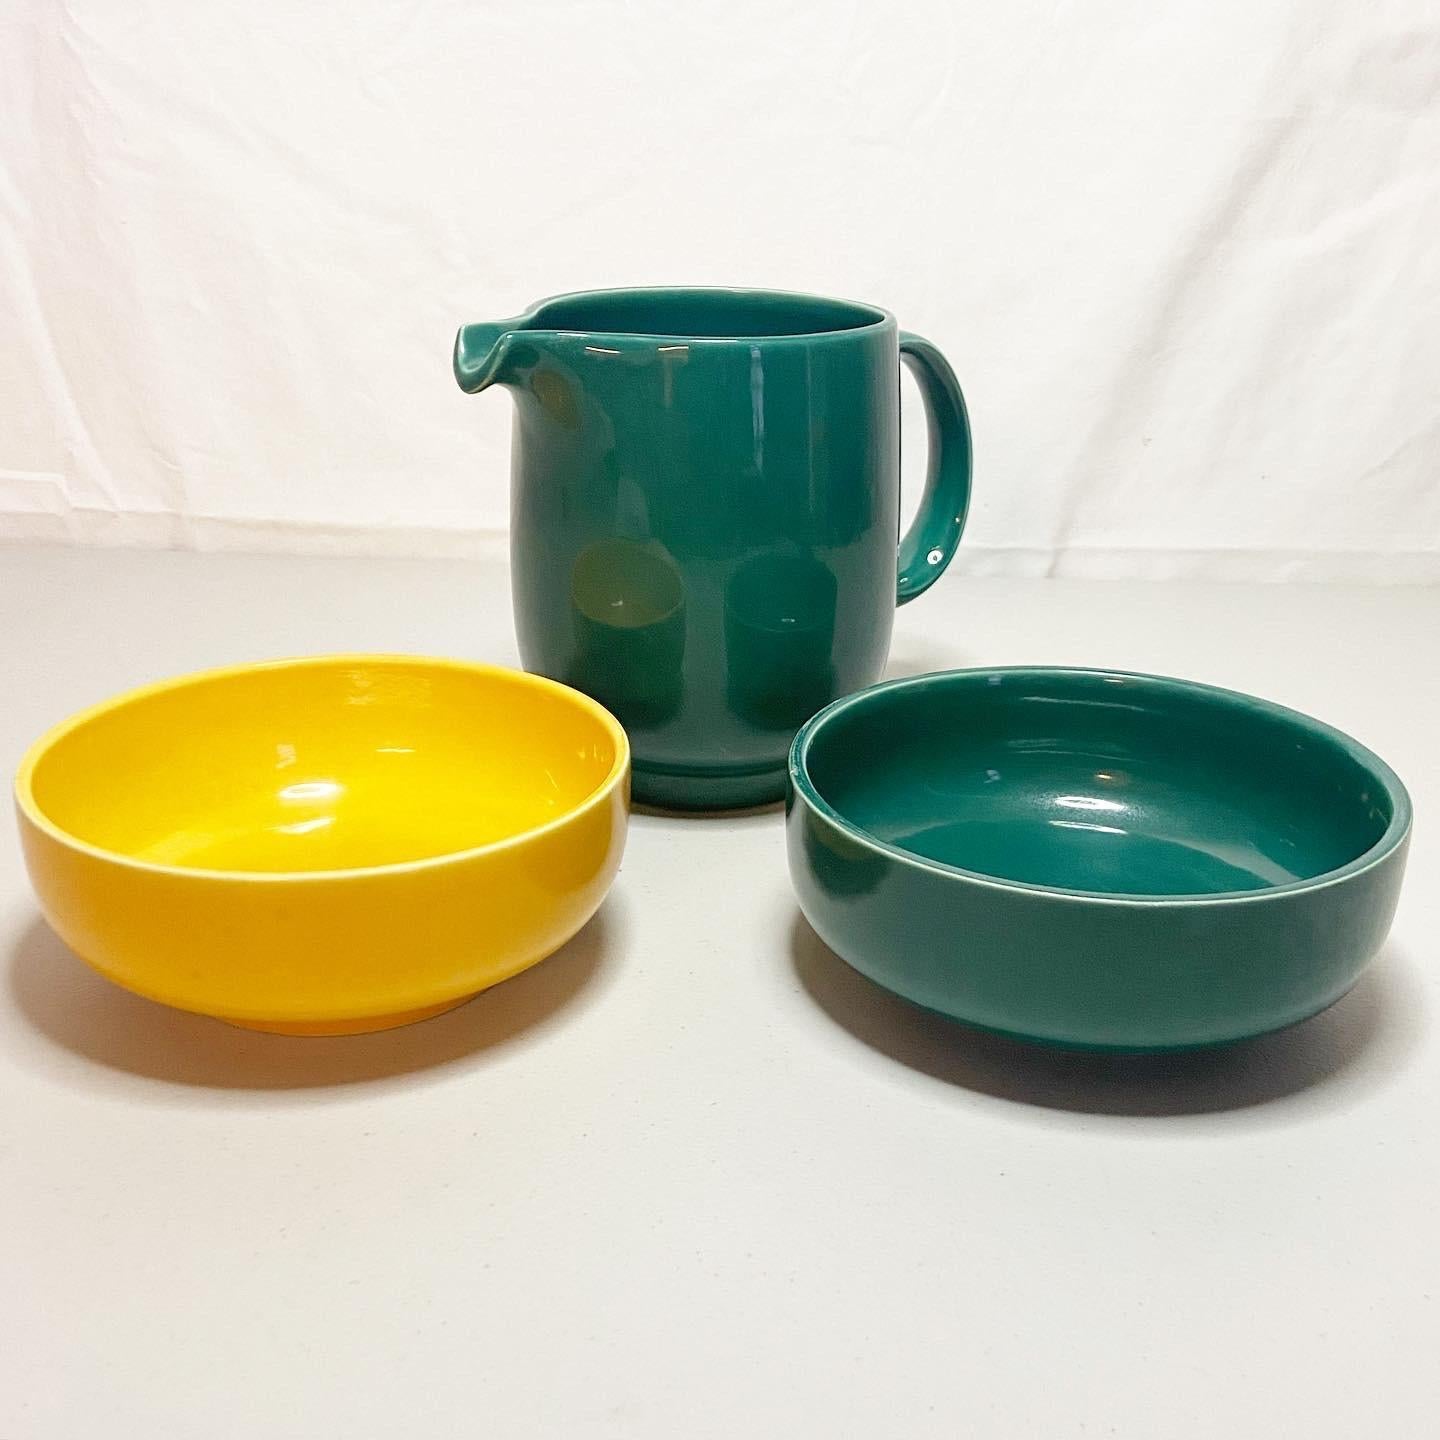 A 3-piece ceramic bowl and pitcher set in the plus pattern designed by fashion icon Wolf Karnagel and made by Rosenthal. Made in Germany during the years of 1965-1979. This pattern is currently out of production.

2 bowls - 6”D, 2.25”H
1 pitcher -